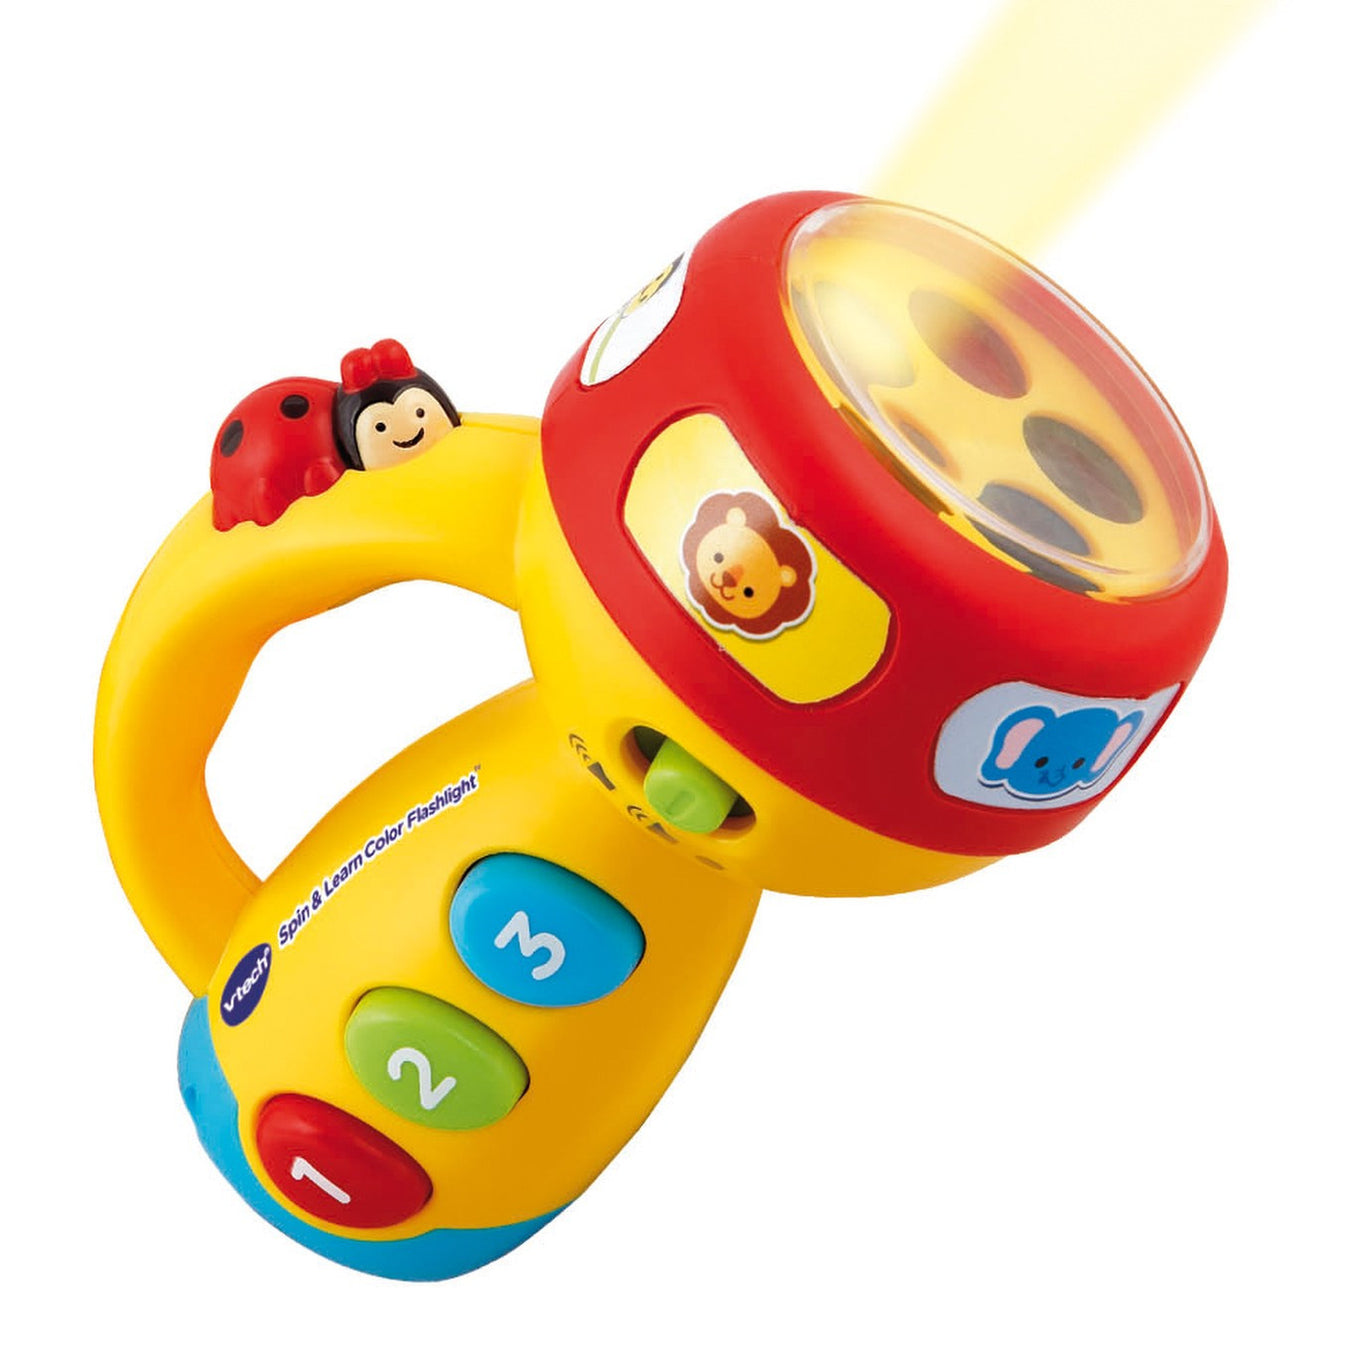 Top Electronic Learning Toys for Kids